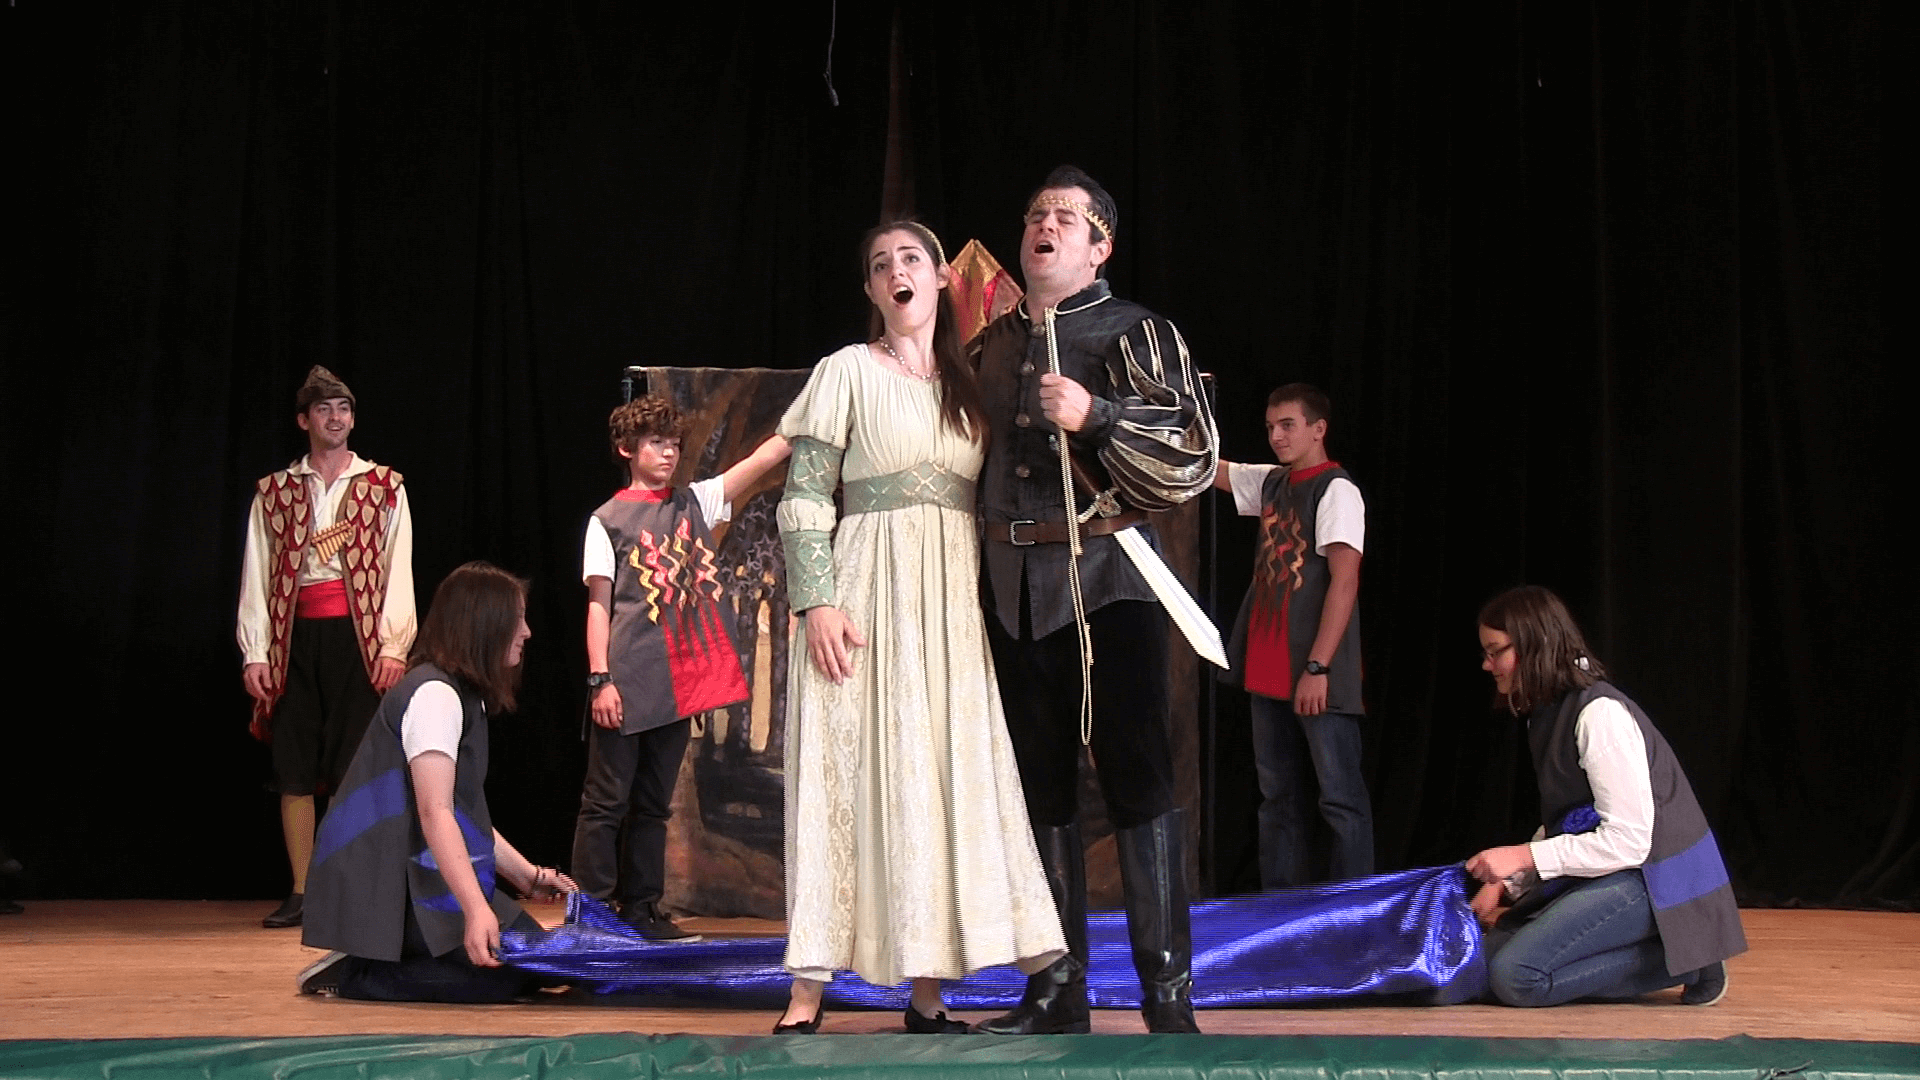 Magic Flute cast performing on stage